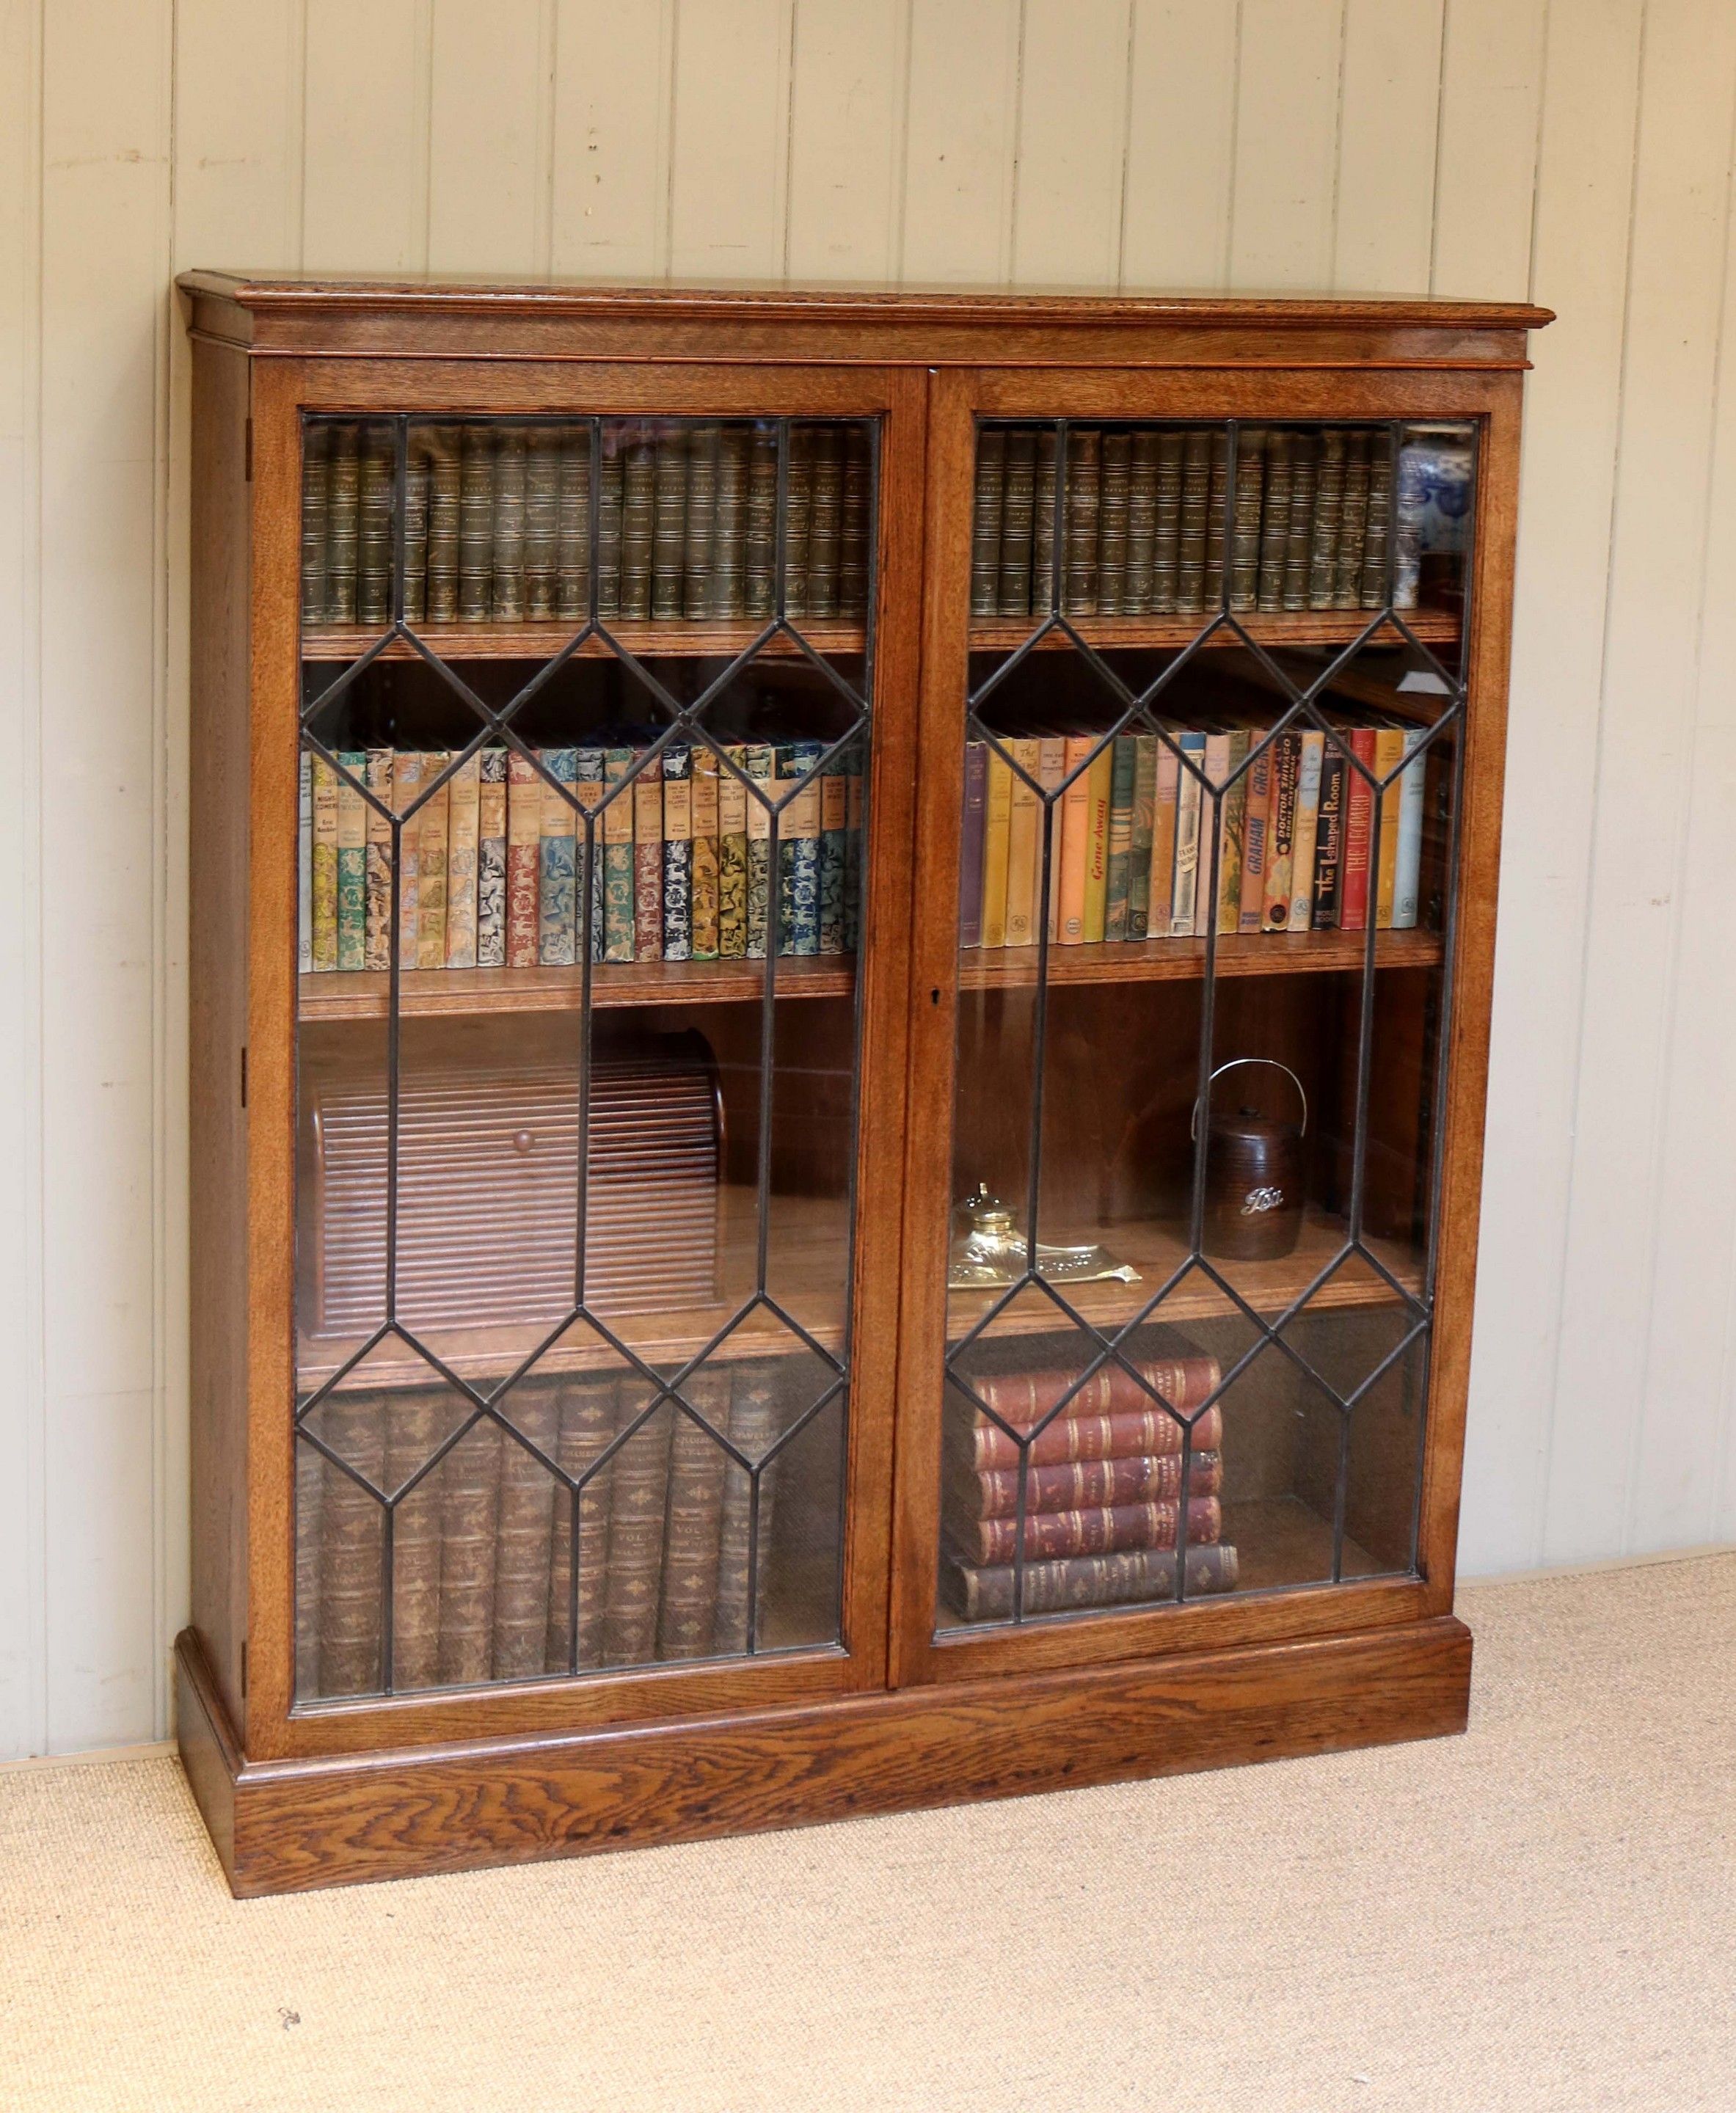 Substantial Solid Oak Glazed Bookcase C 1920 English From Regarding Oak Glazed Bookcase (View 8 of 15)